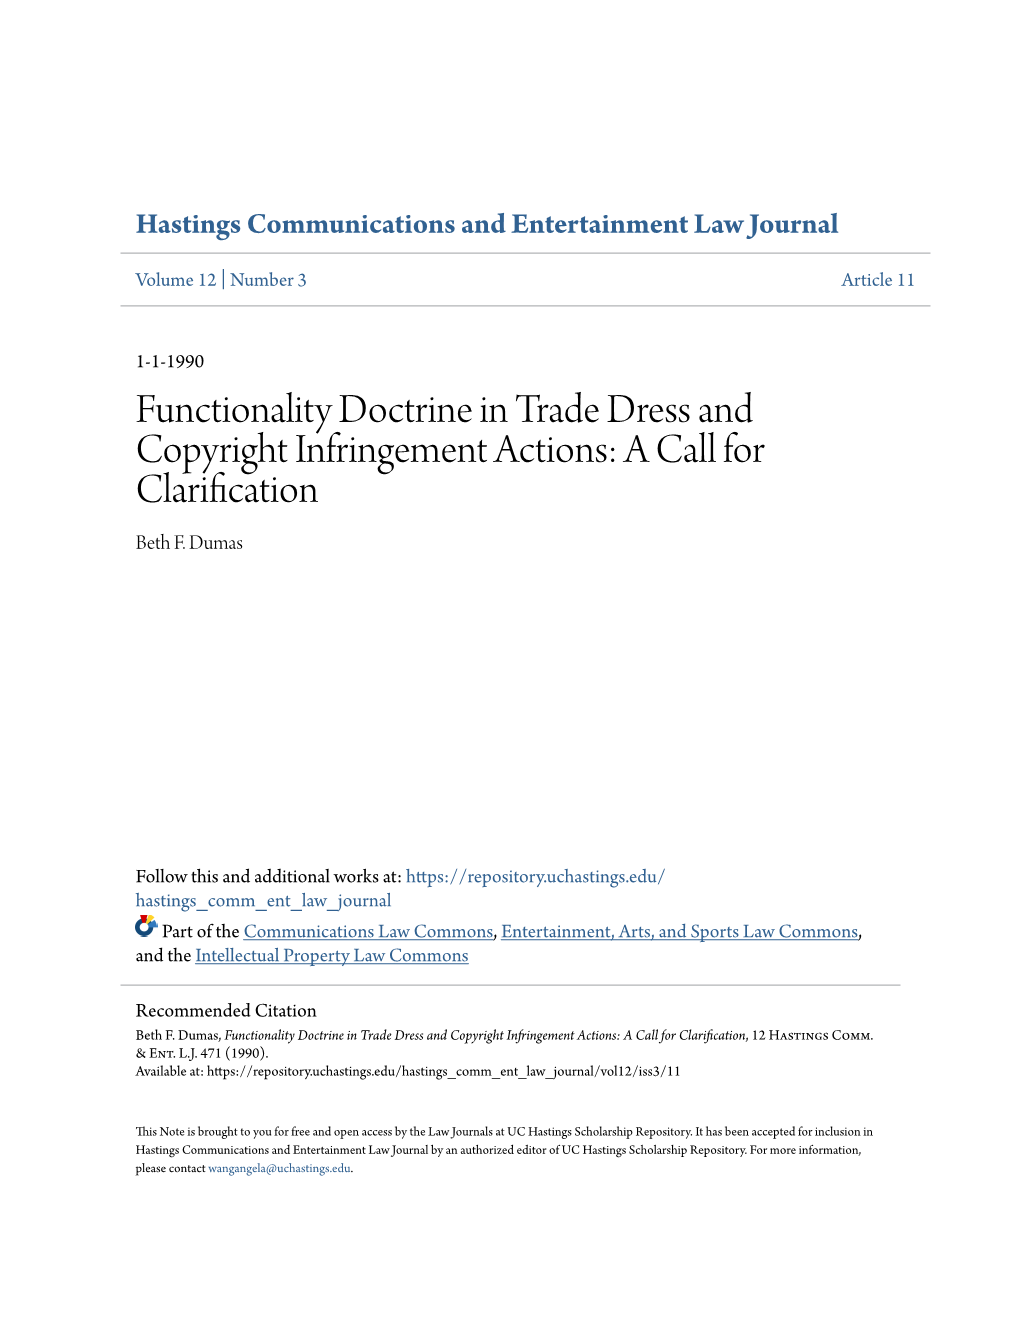 Functionality Doctrine in Trade Dress and Copyright Infringement Actions: a Call for Clarification Beth F